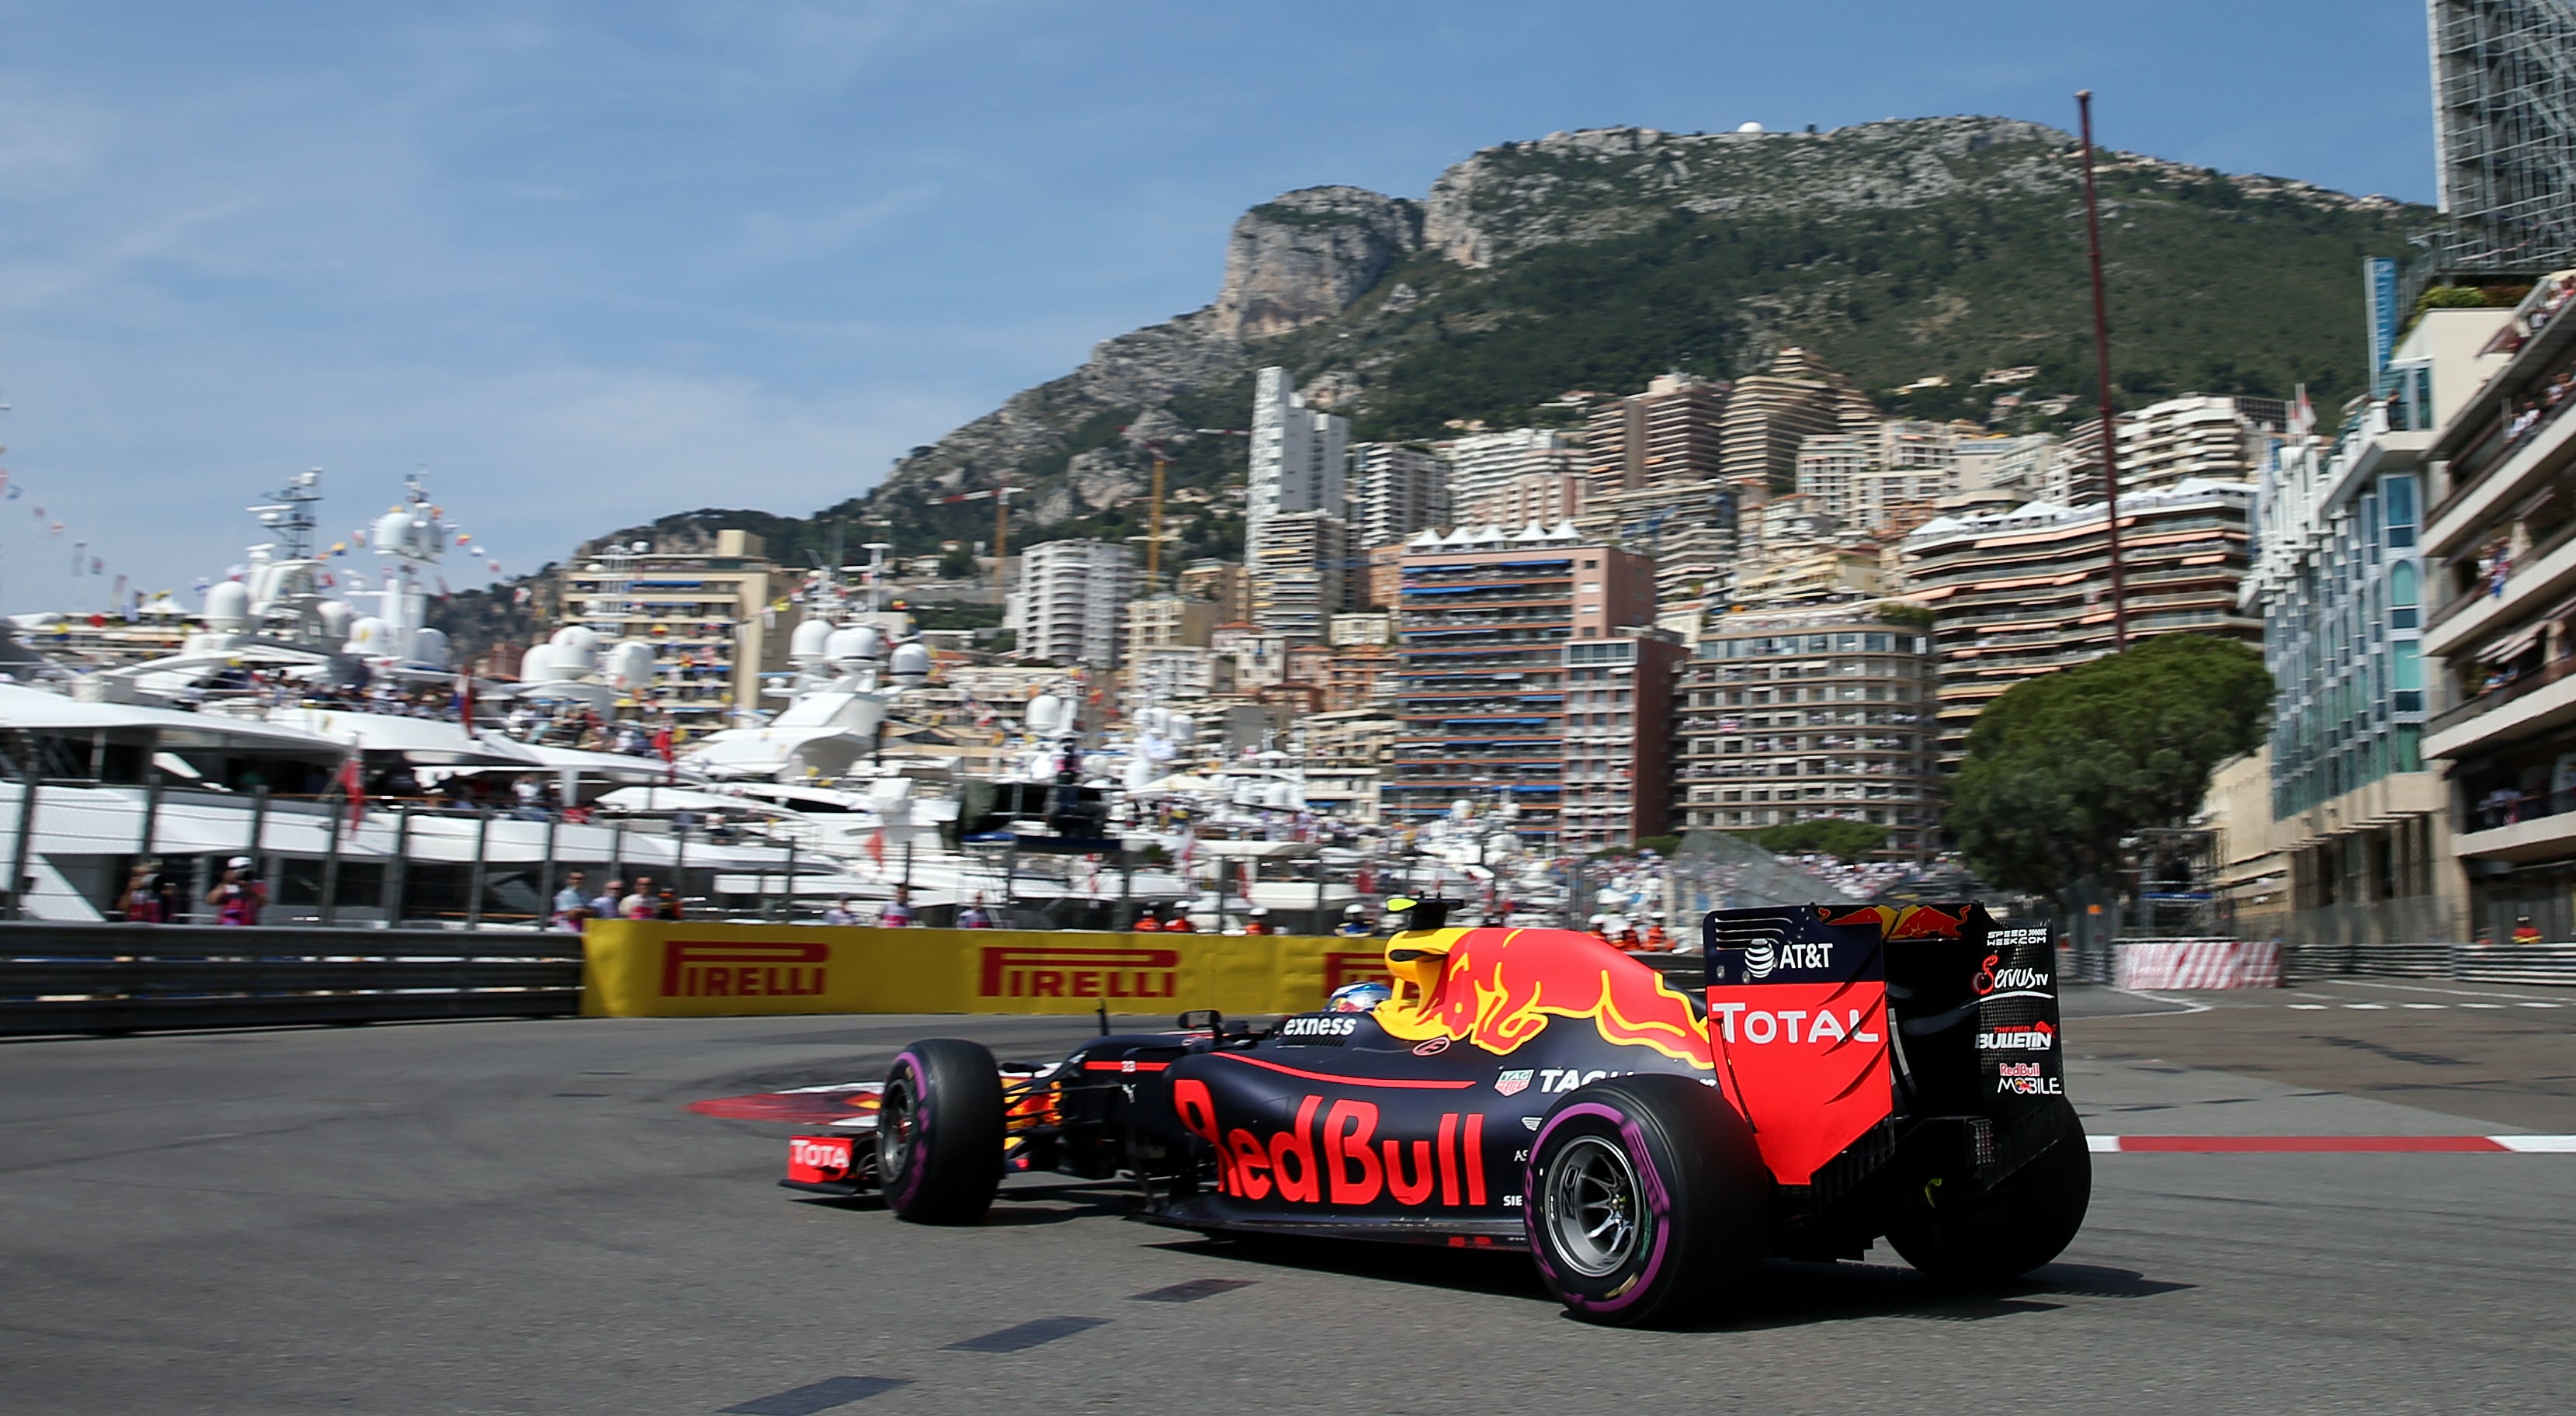 Max Verstappen pictured at the Circuit de Monaco, Monaco, after being promoted to drive for Red Bull in 2016.